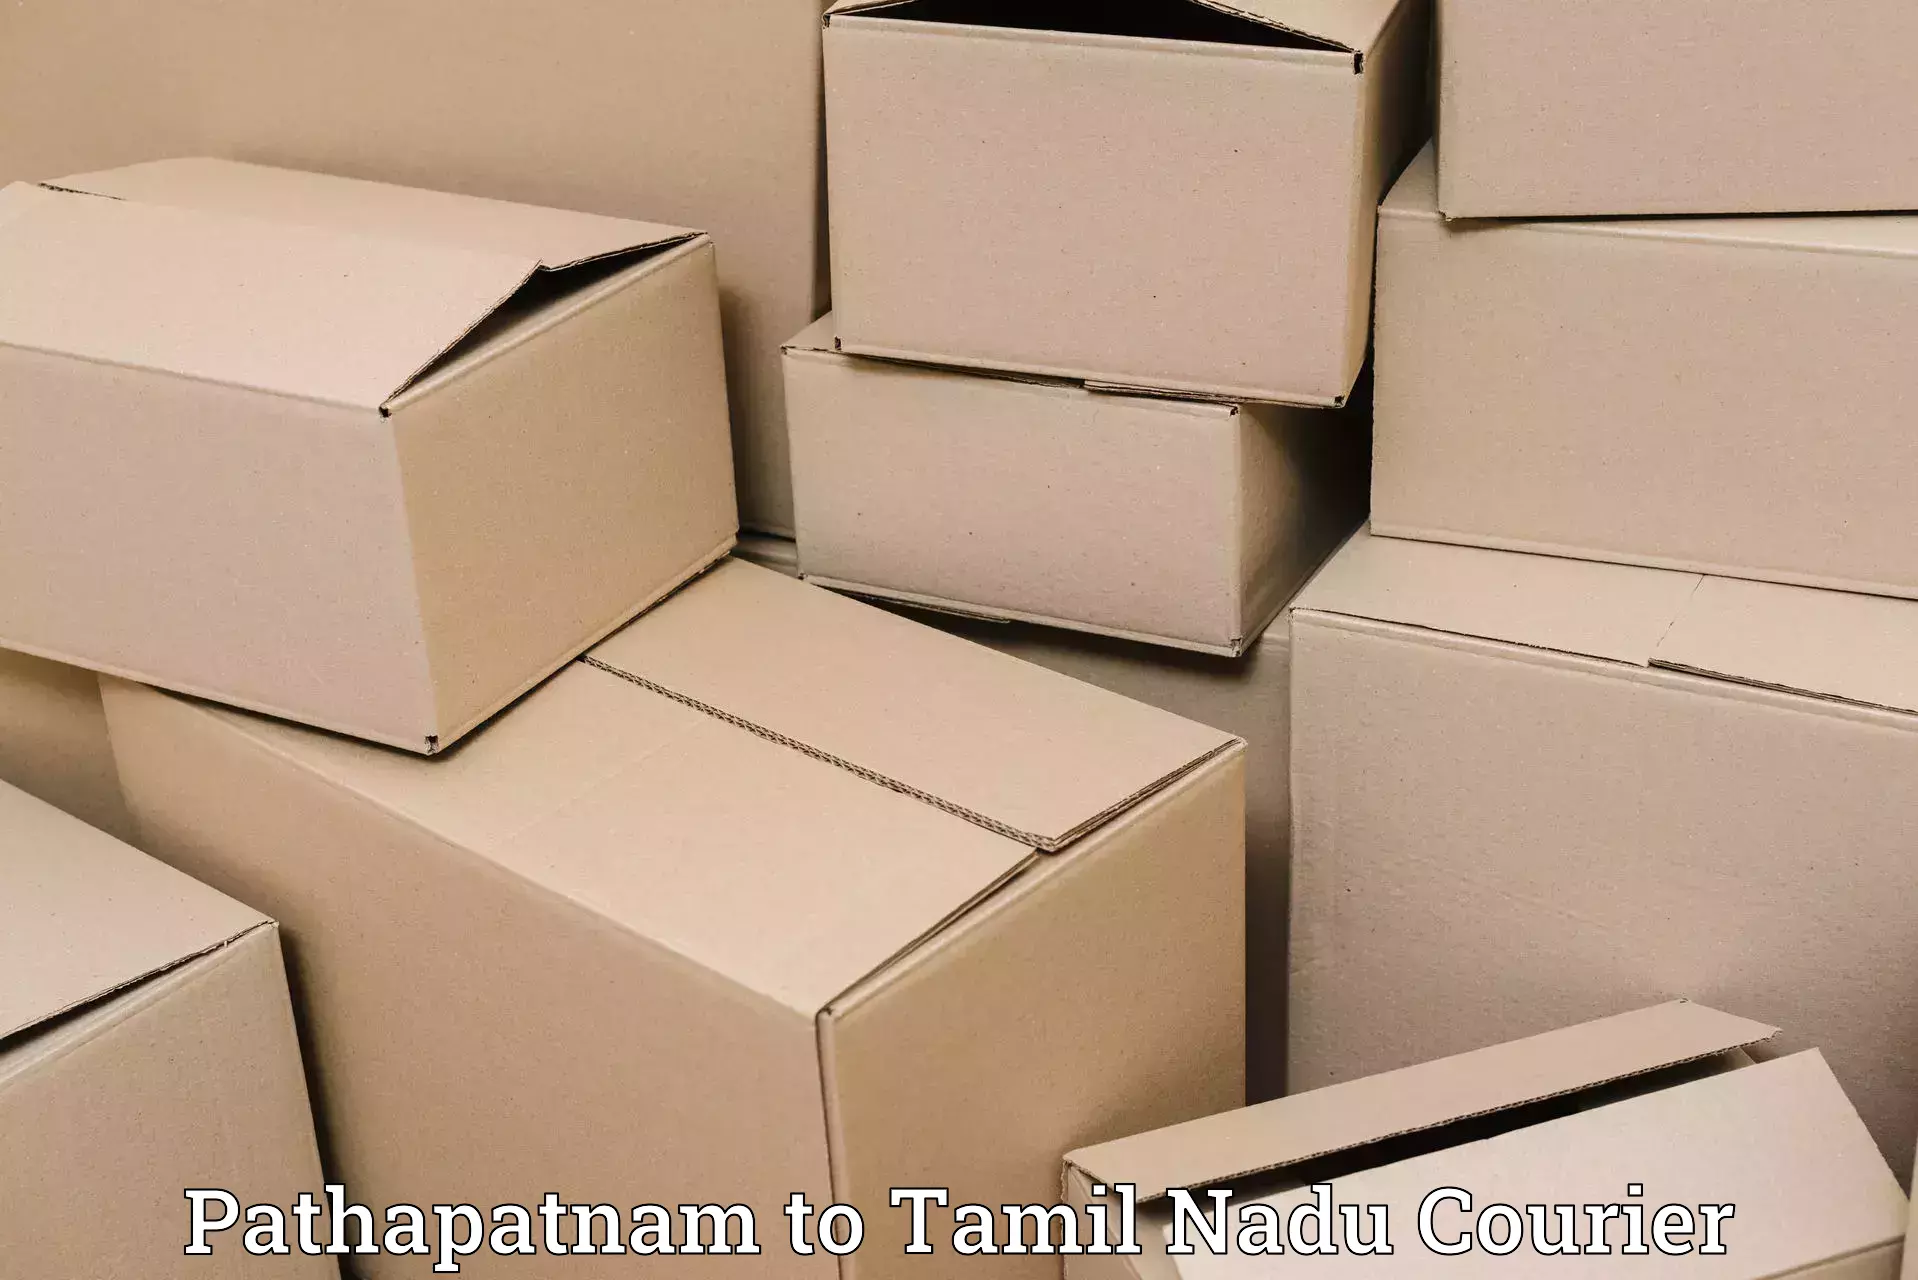 Streamlined shipping process Pathapatnam to Omalur